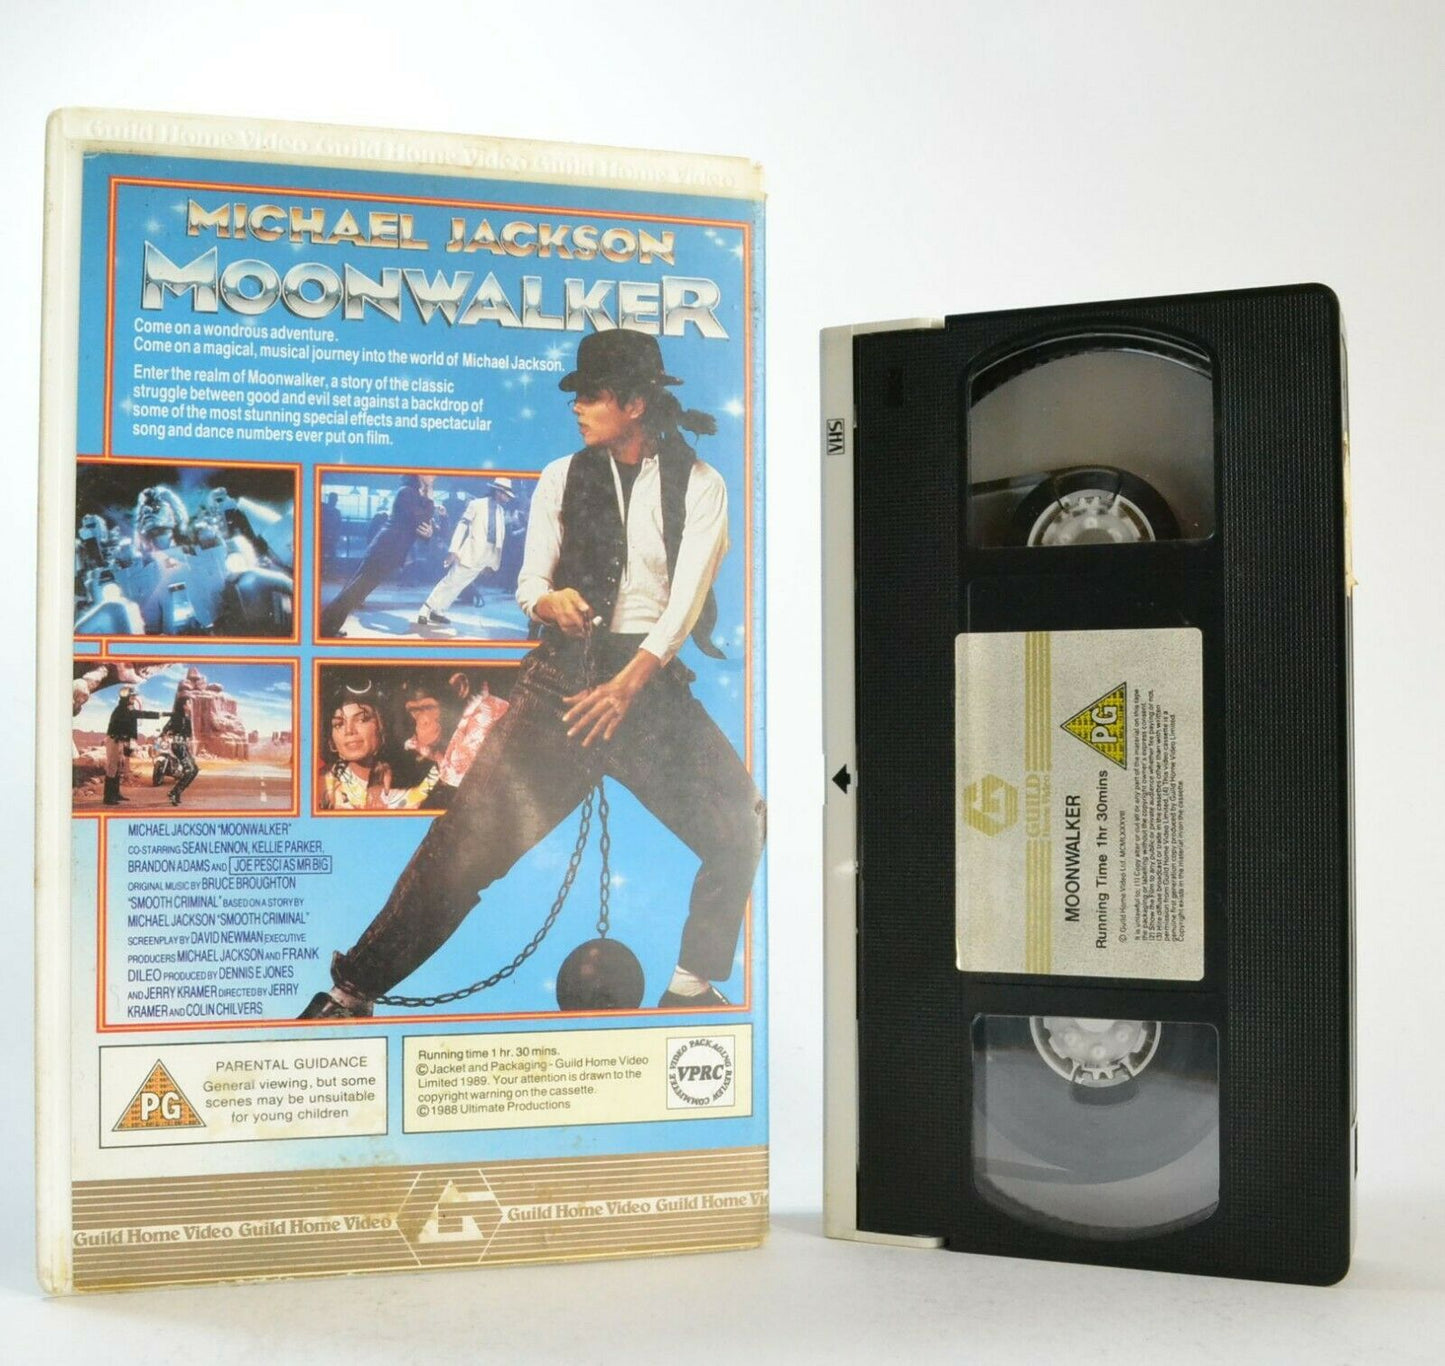 Moonwalker: A Movie Like No Other - Large Box - Musical - Michael Jackson - VHS-